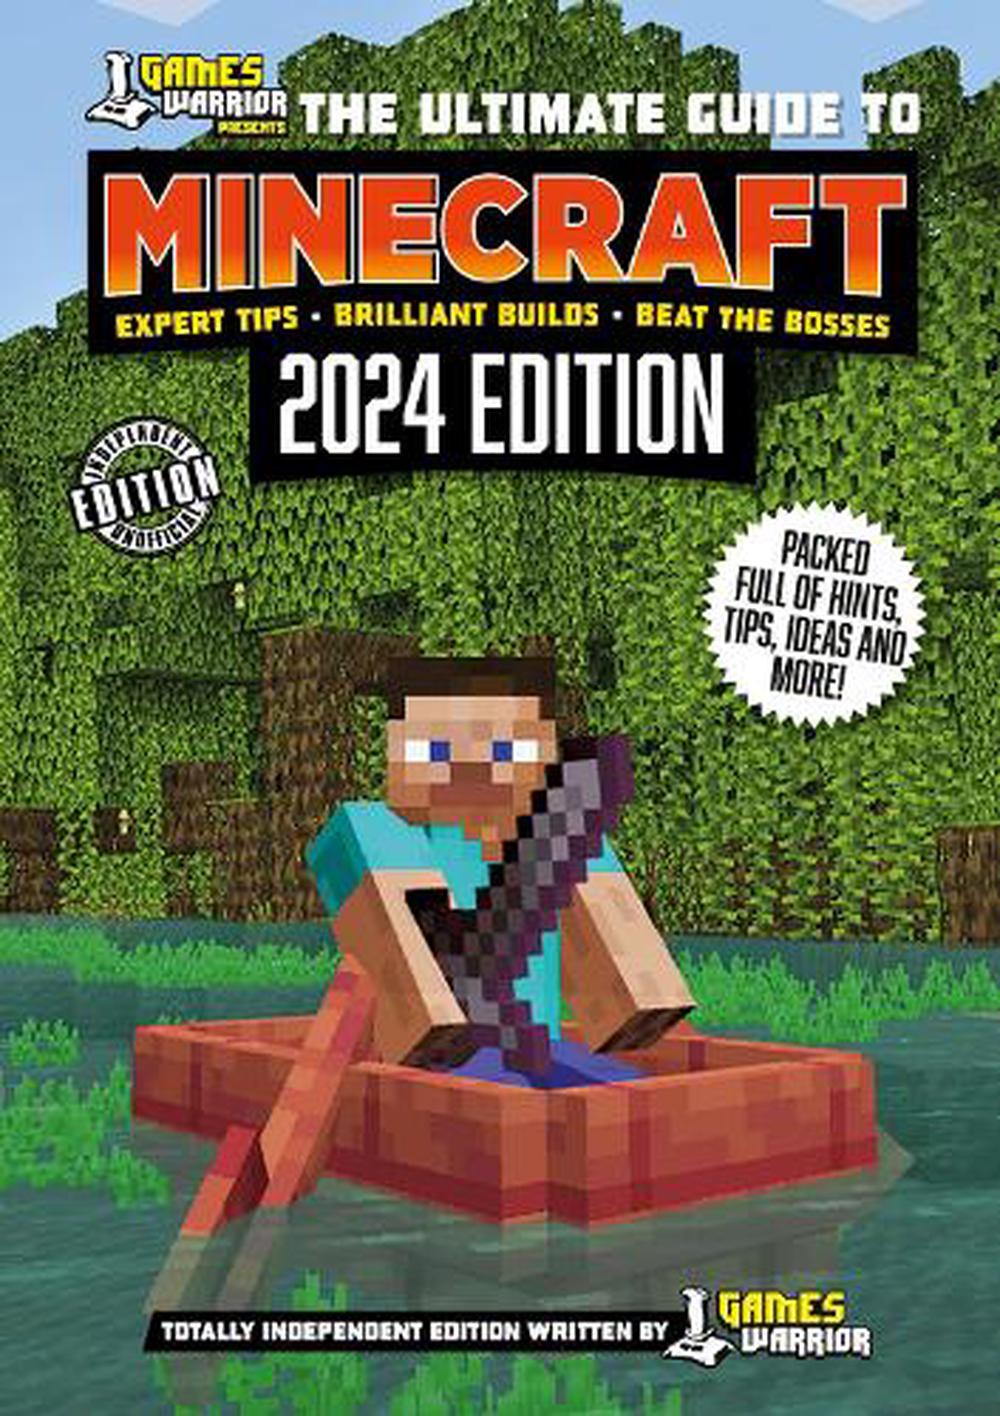 The Minecraft Earth Essential Guide (independent & Unofficial